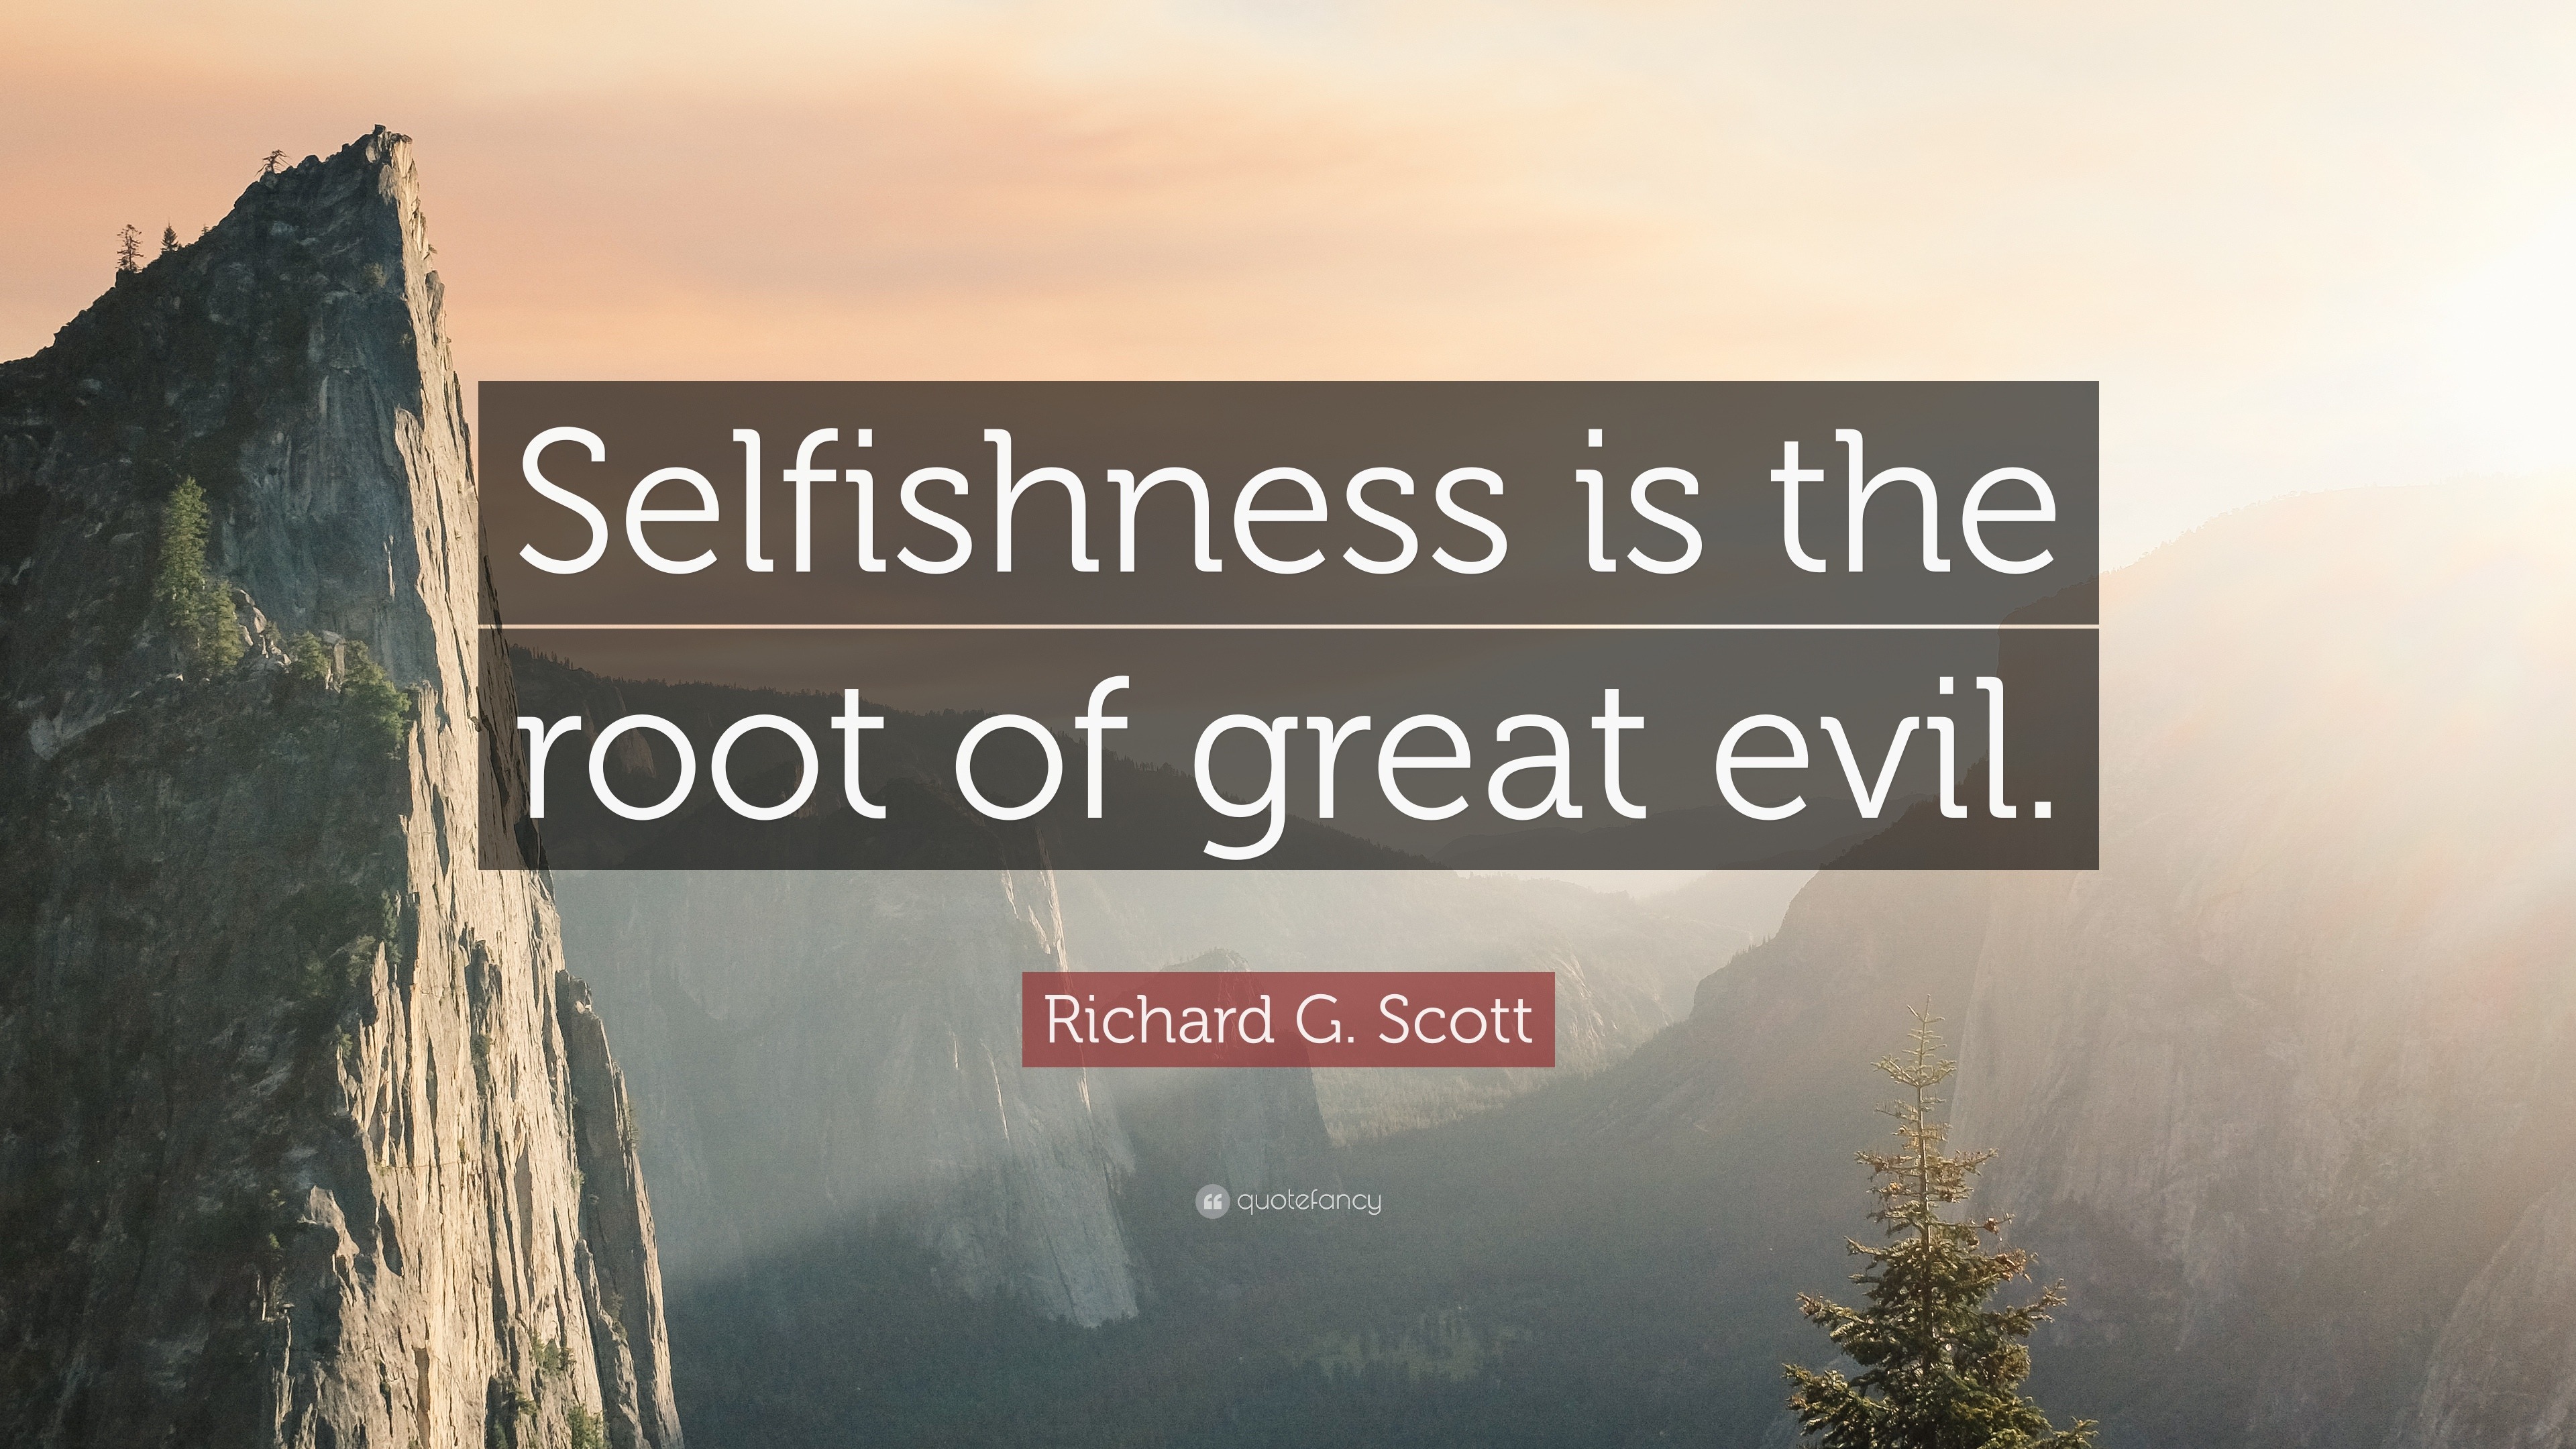 why is selfishness bad